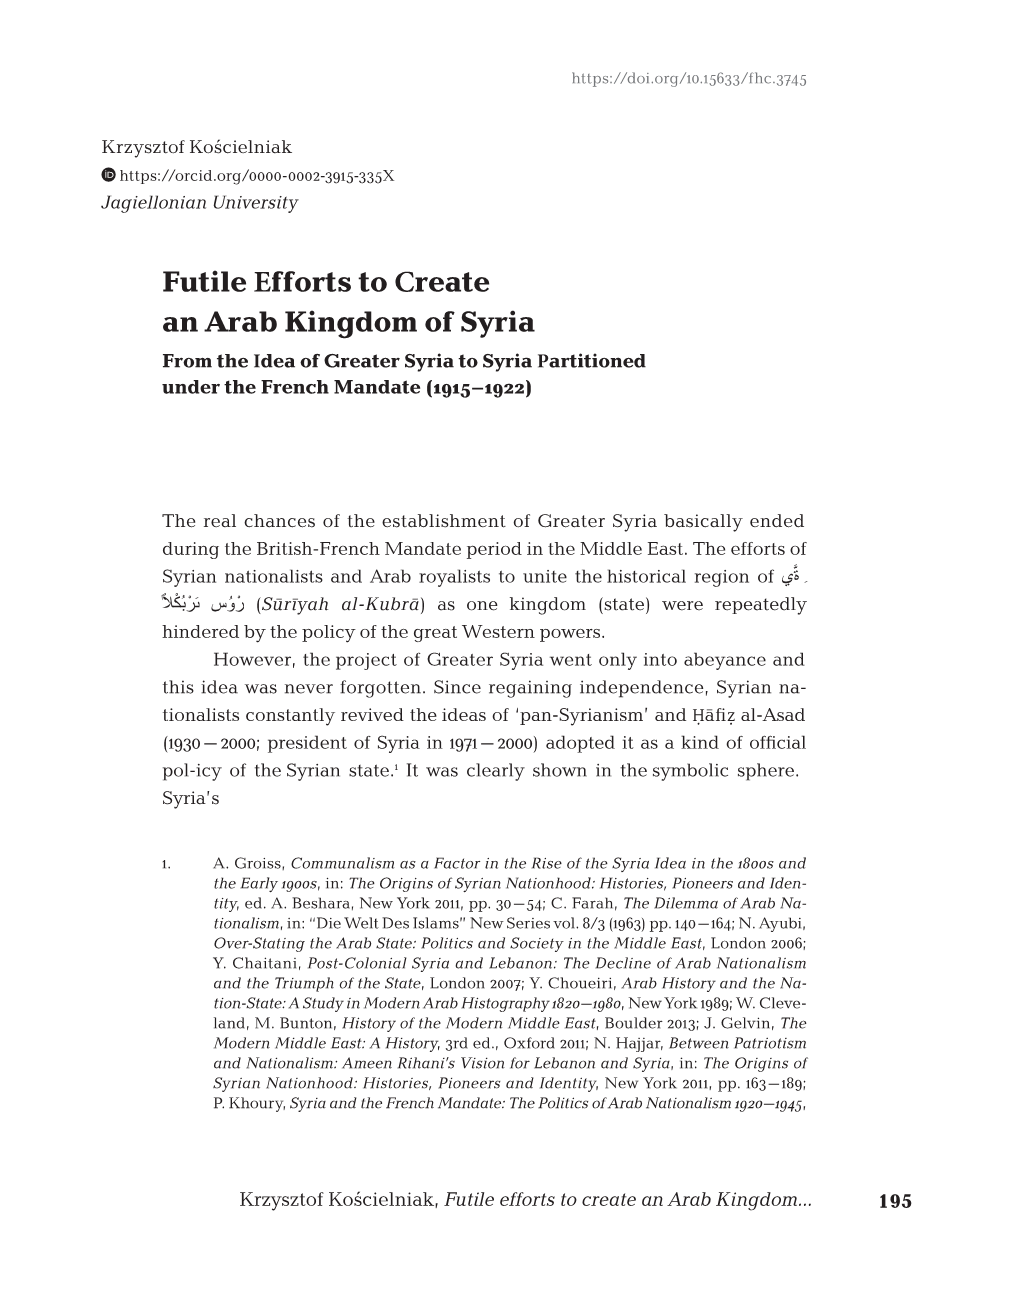 Futile Efforts to Create an Arab Kingdom of Syria from the Idea of Greater Syria to Syria Partitioned Under the French Mandate (1915–1922)